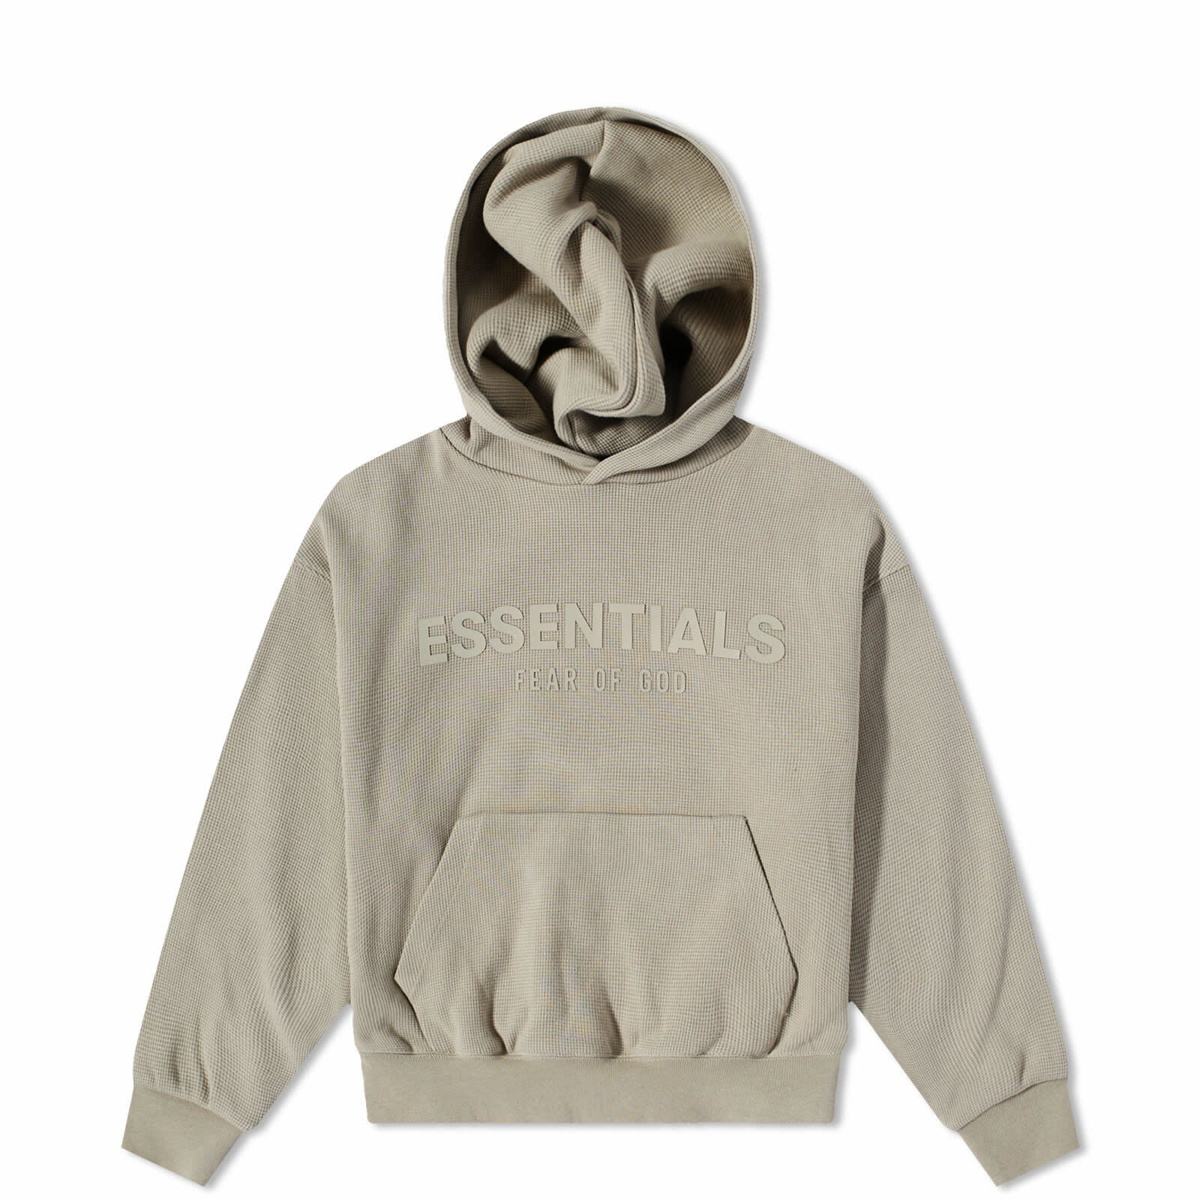 Fear of God ESSENTIALS Kids Popover Hoody in Seal Fear Of God Essentials